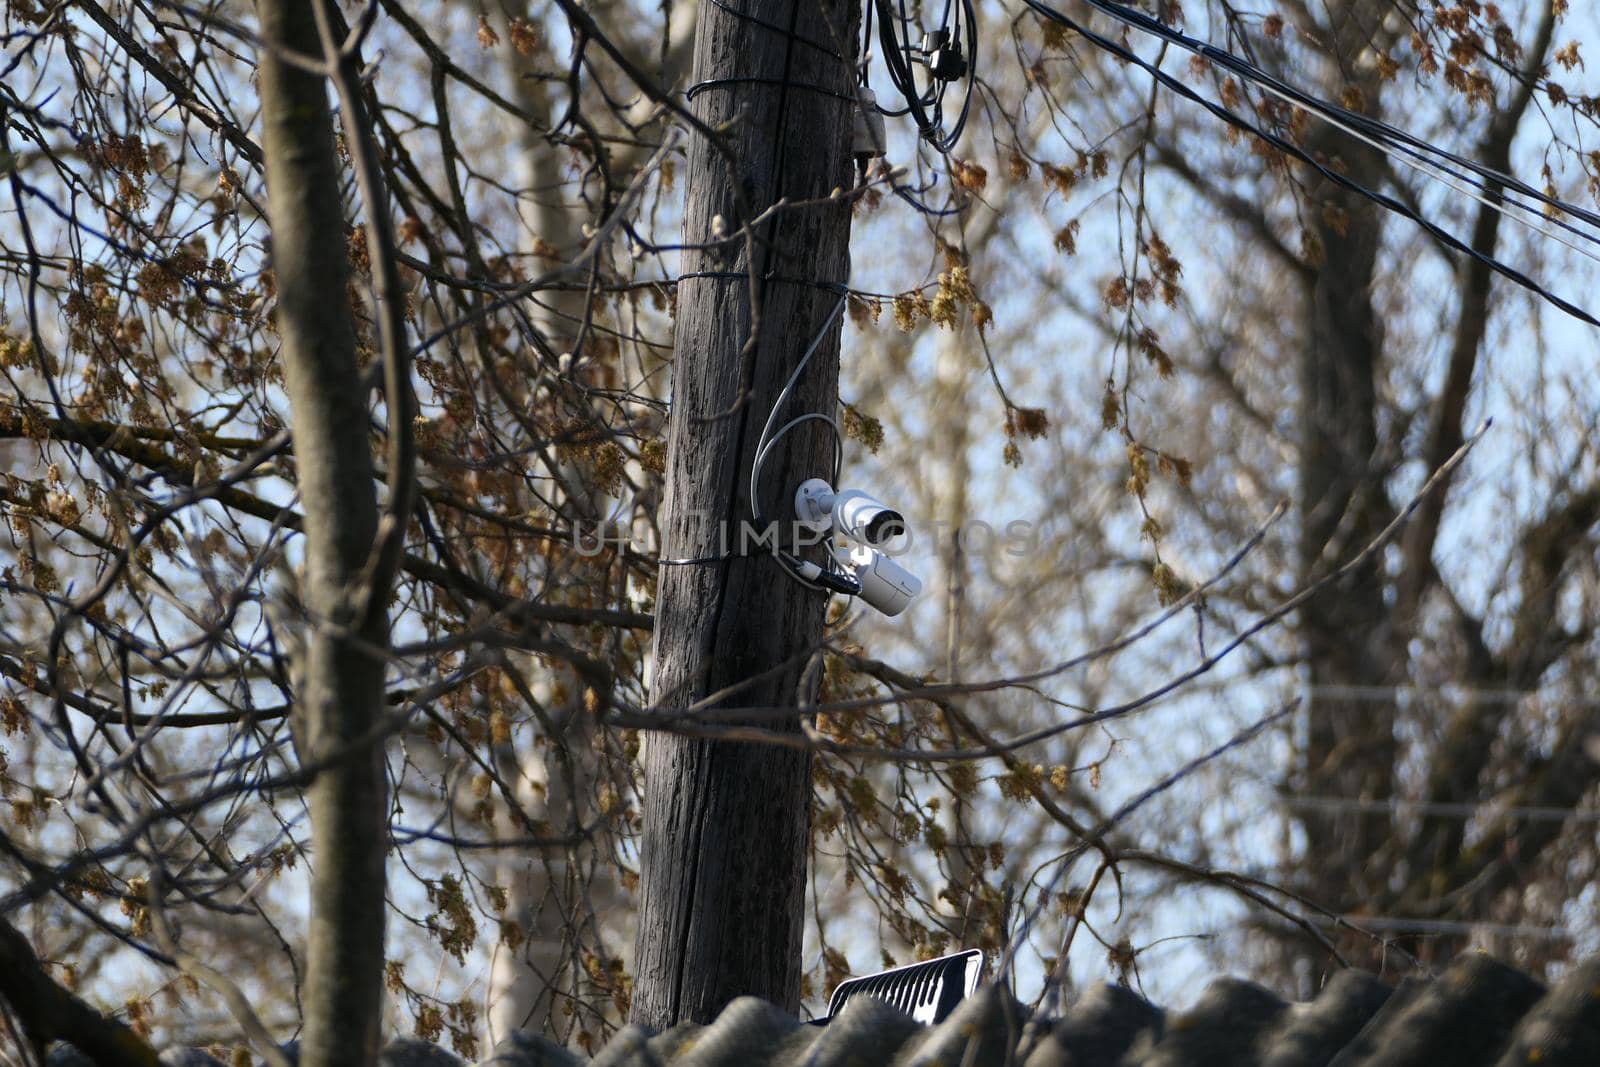 An external CCTV camera mounted on a pole, on a tree in the street. Security and CCTV.